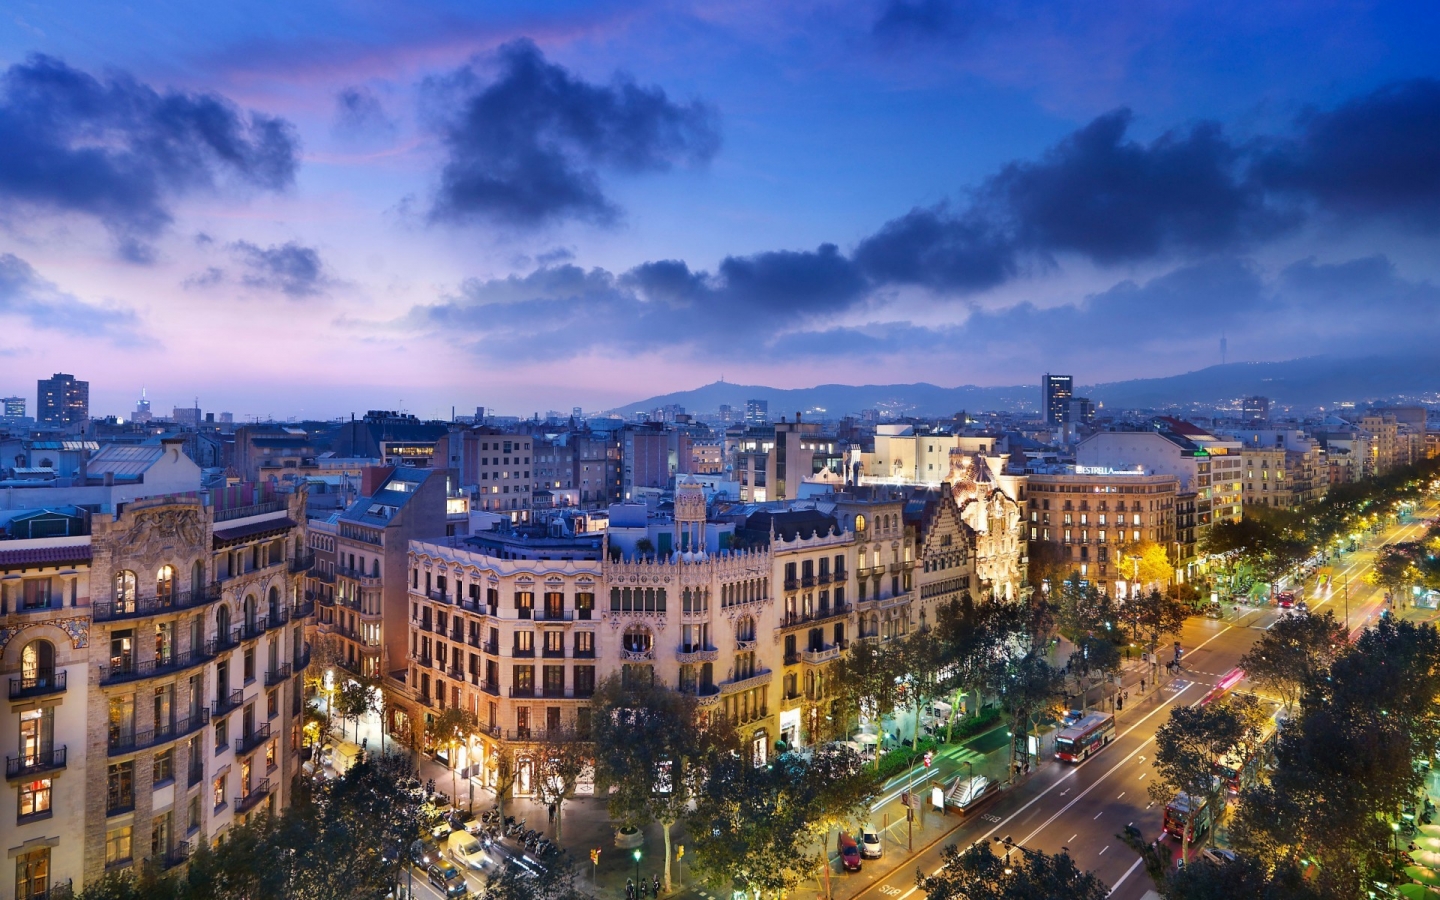 Night in Barcelona for 1440 x 900 widescreen resolution